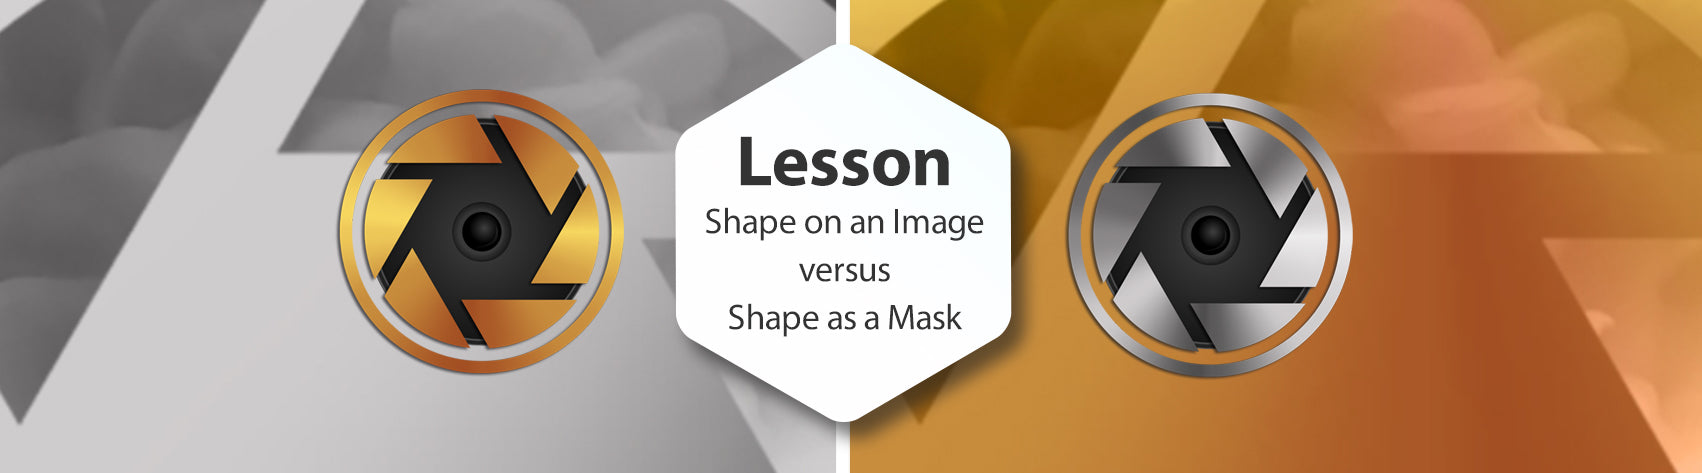 Lesson - Shape on an Image Versus Shape as a Mask